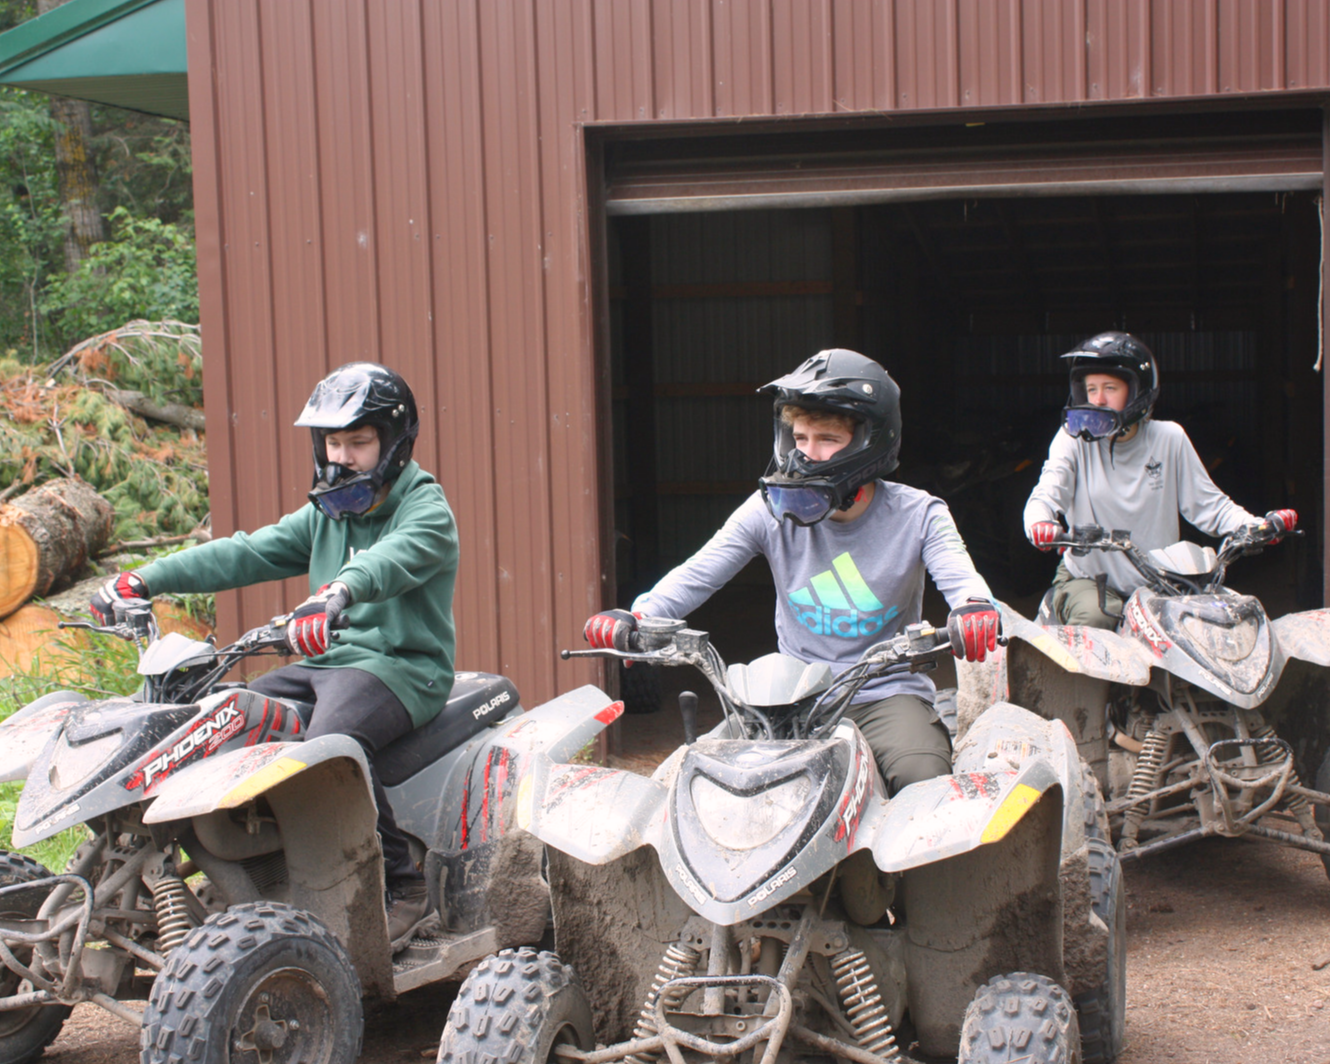 A group of Scouts wearing helmets and other protective gear are driving ATVs out of the garage they are stored in to the field